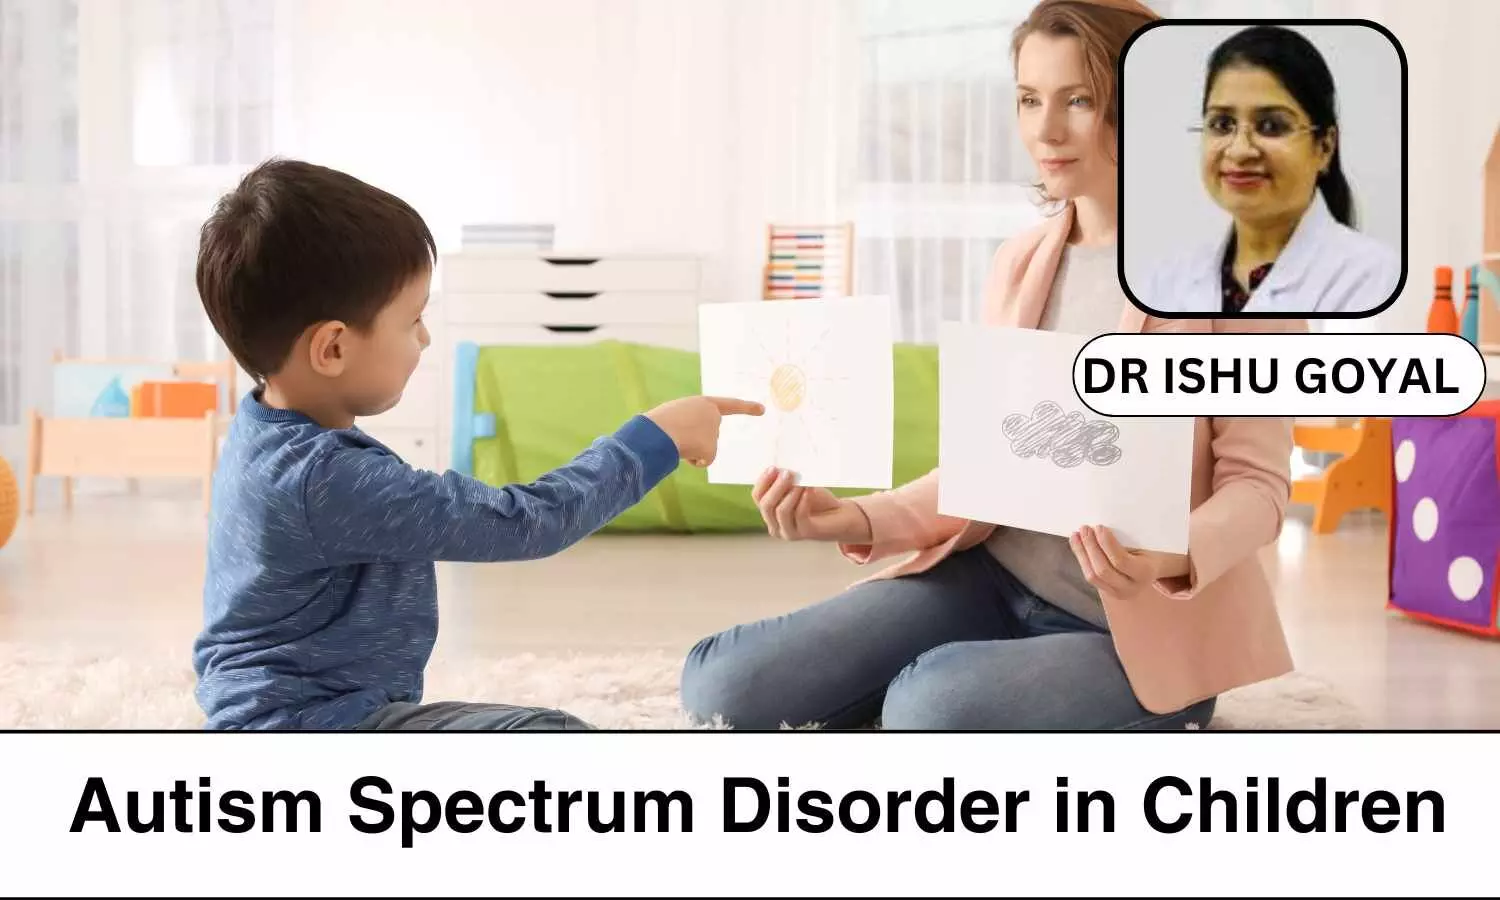 Recognizing and Addressing Autism Spectrum Disorder in Children - Dr Ishu Goyal